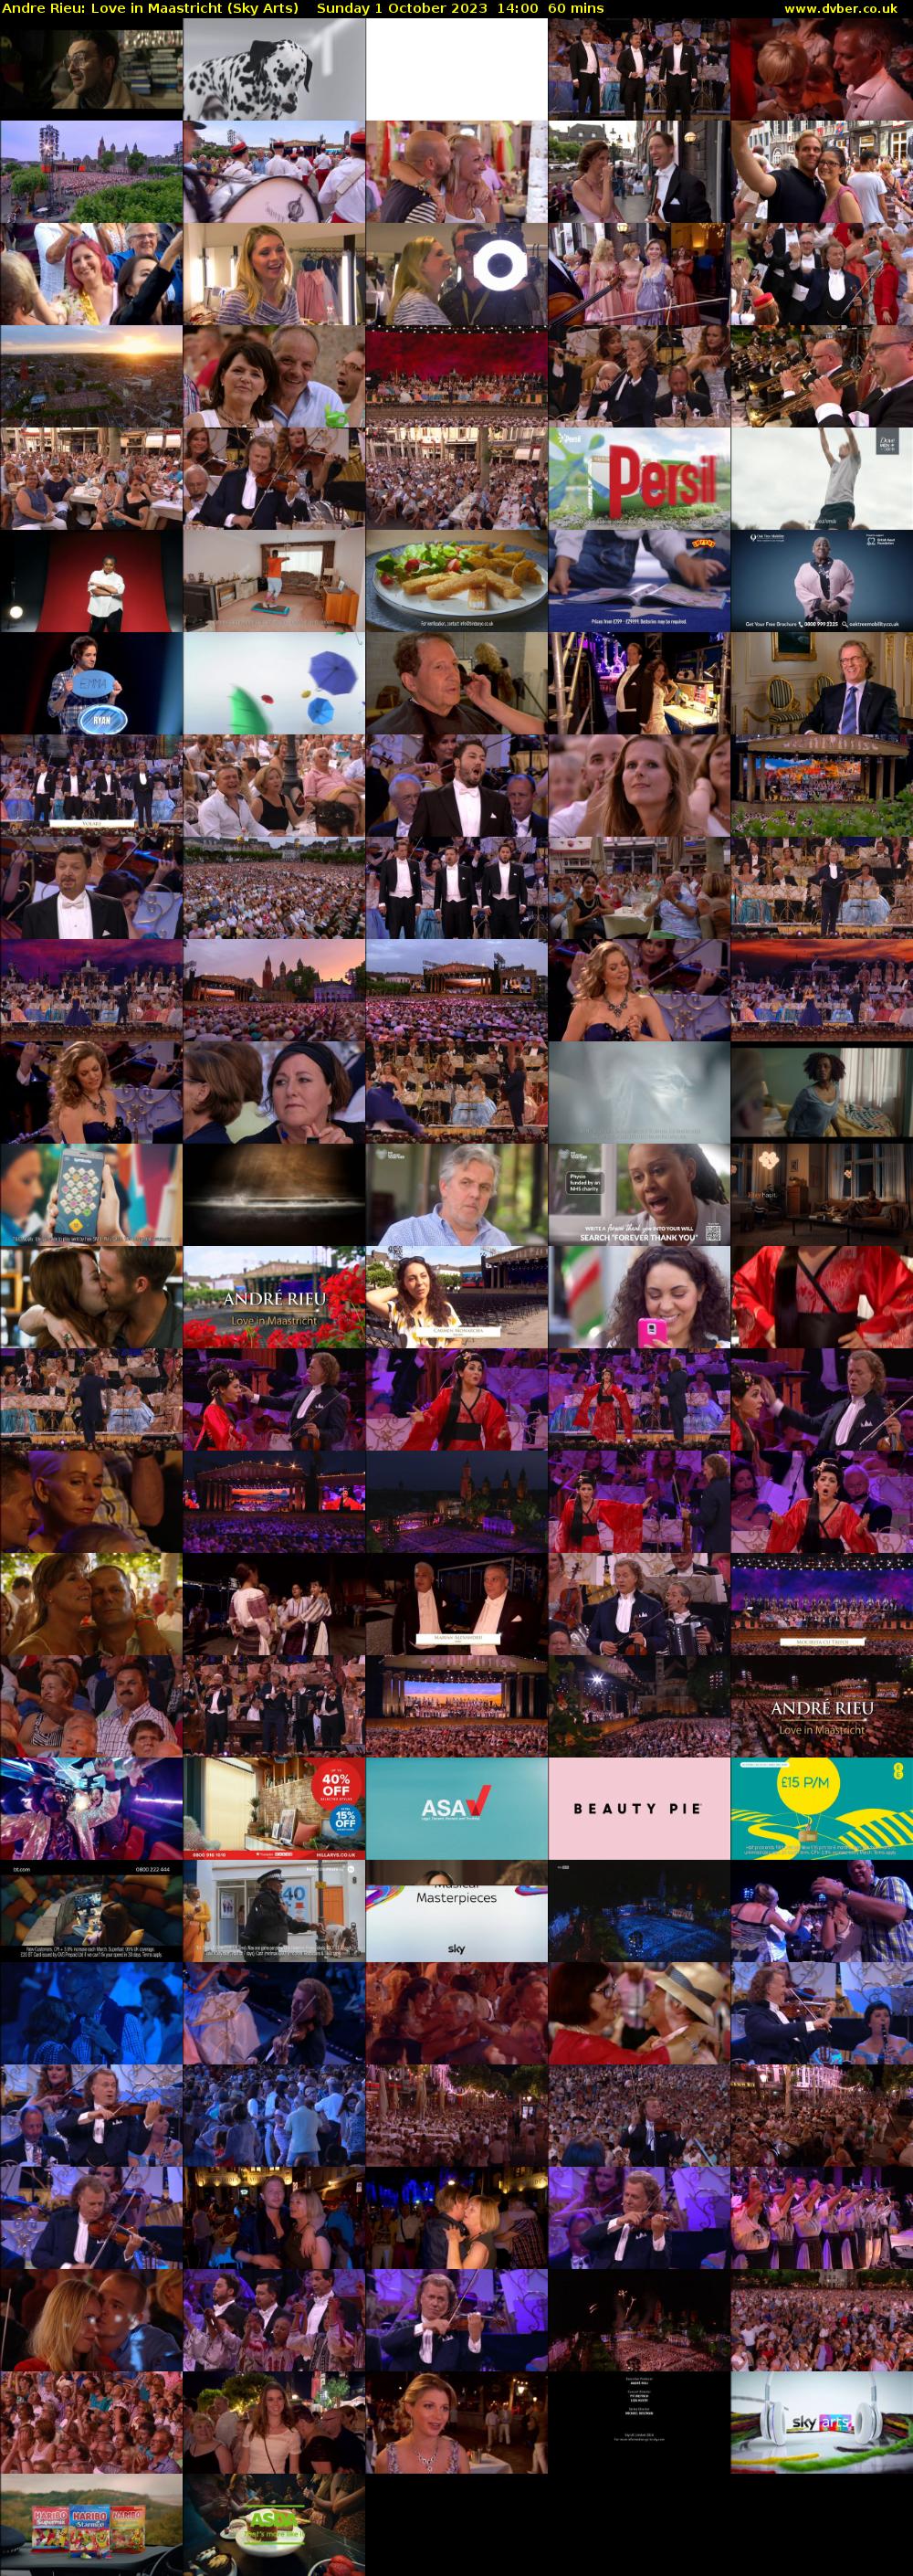 Andre Rieu: Love in Maastricht (Sky Arts) Sunday 1 October 2023 14:00 - 15:00